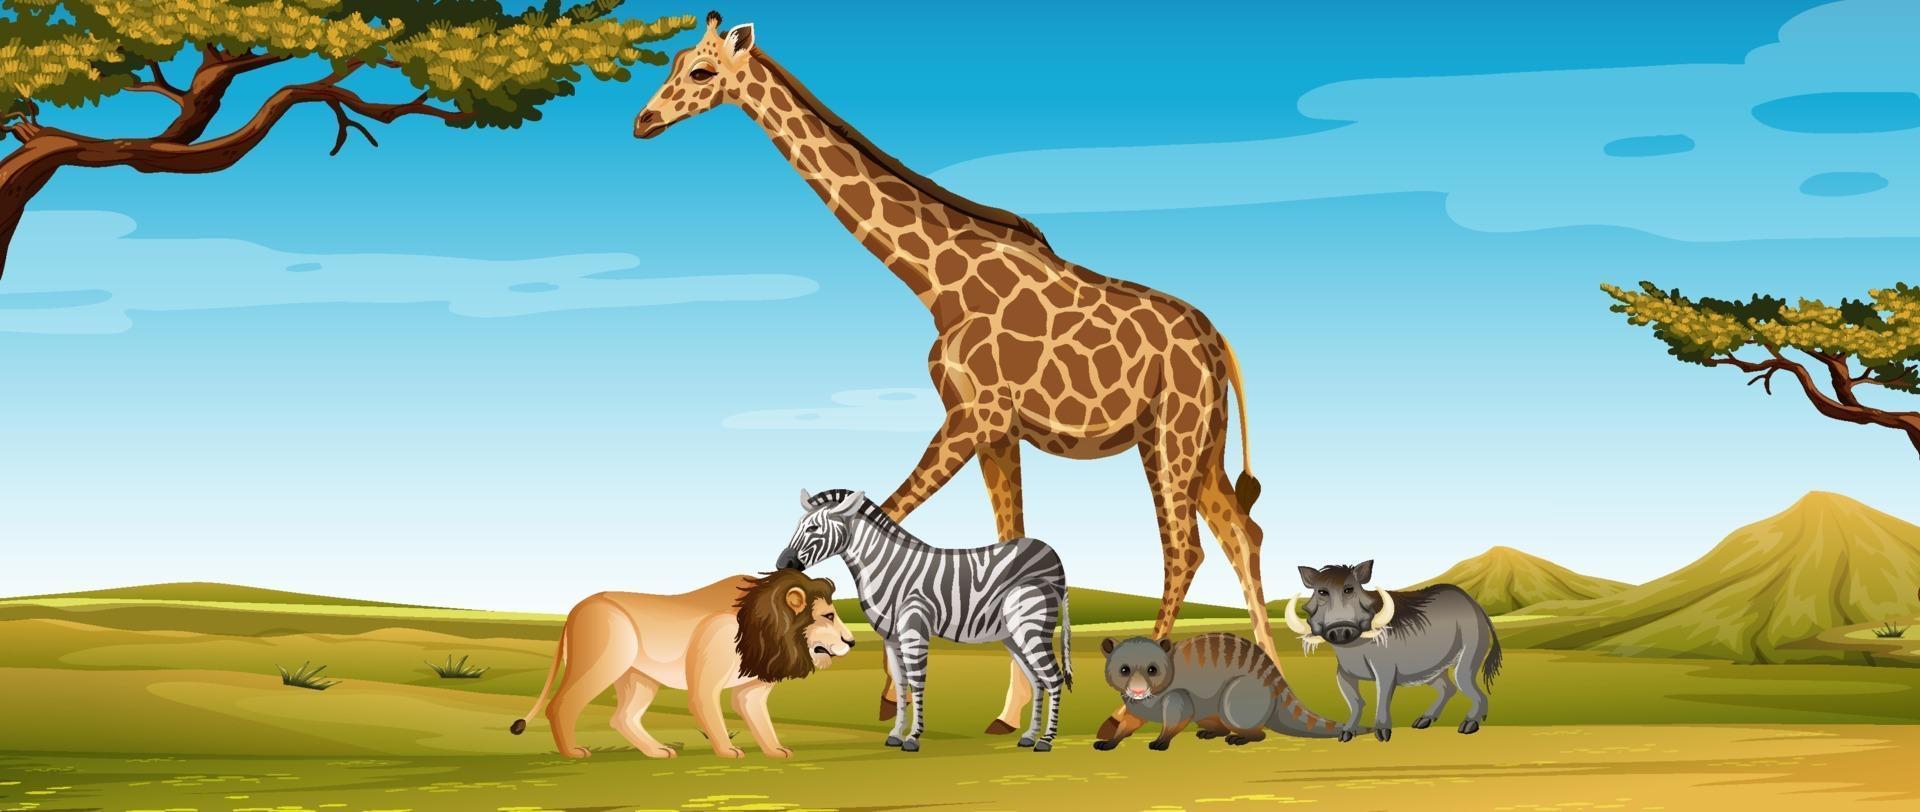 Group of wild african animal in the zoo scene vector